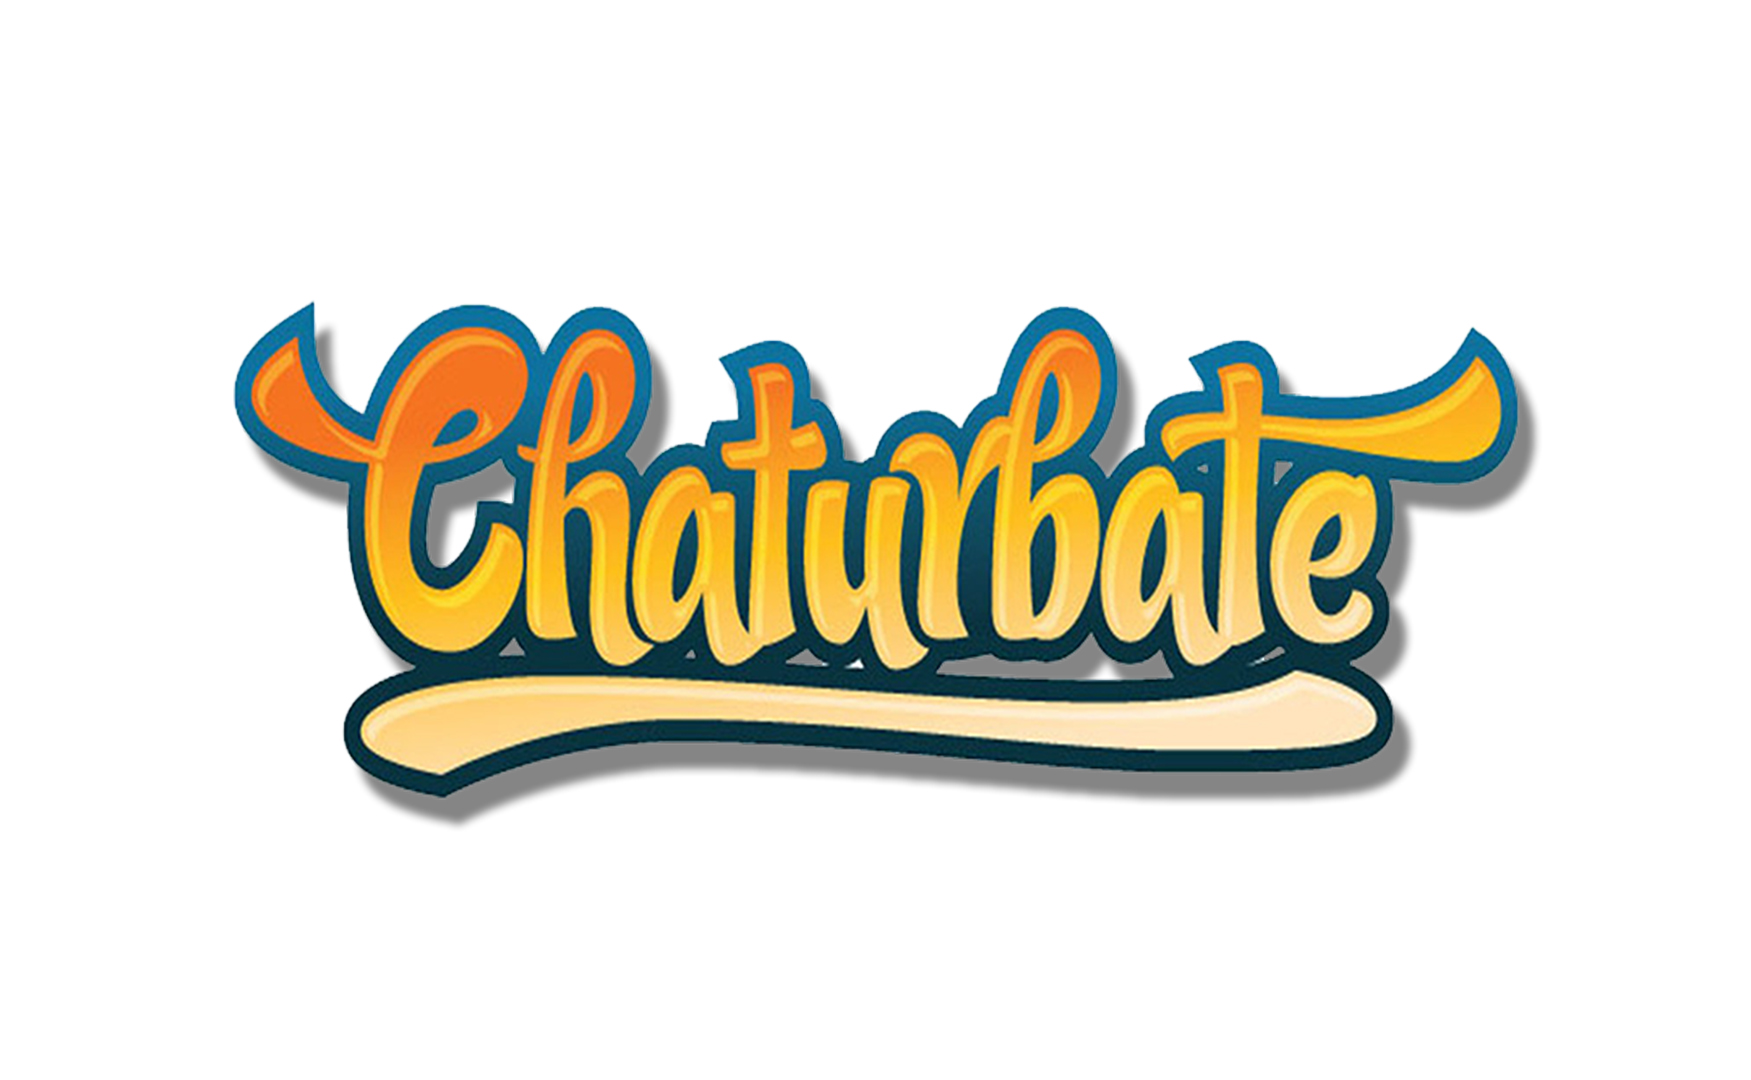 Chartubate meaning